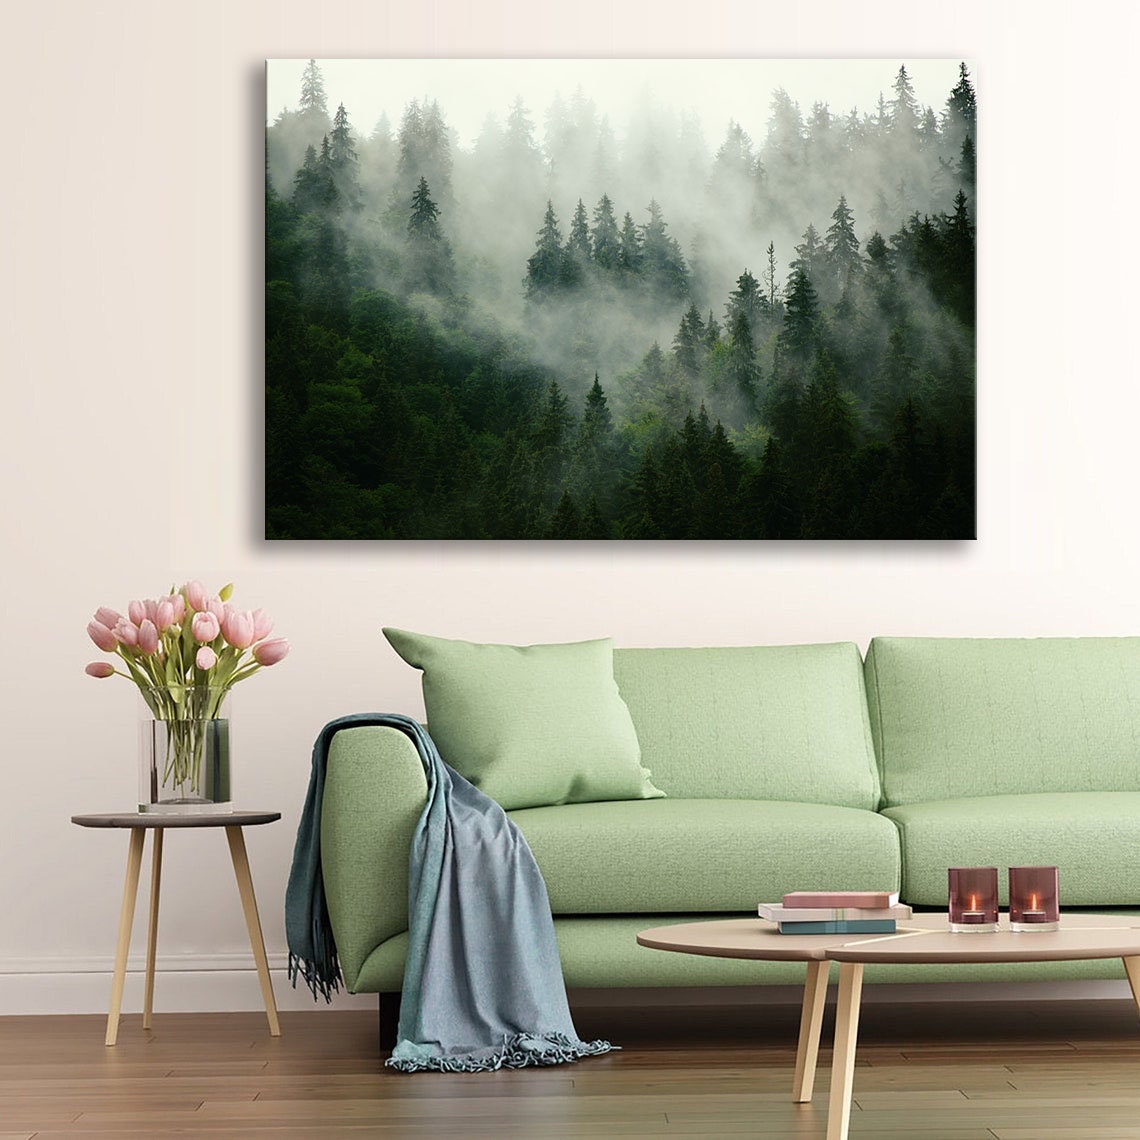 Buy Morning Fogover Mountainswall Art Treesnature Forest Wall Online in India Etsy